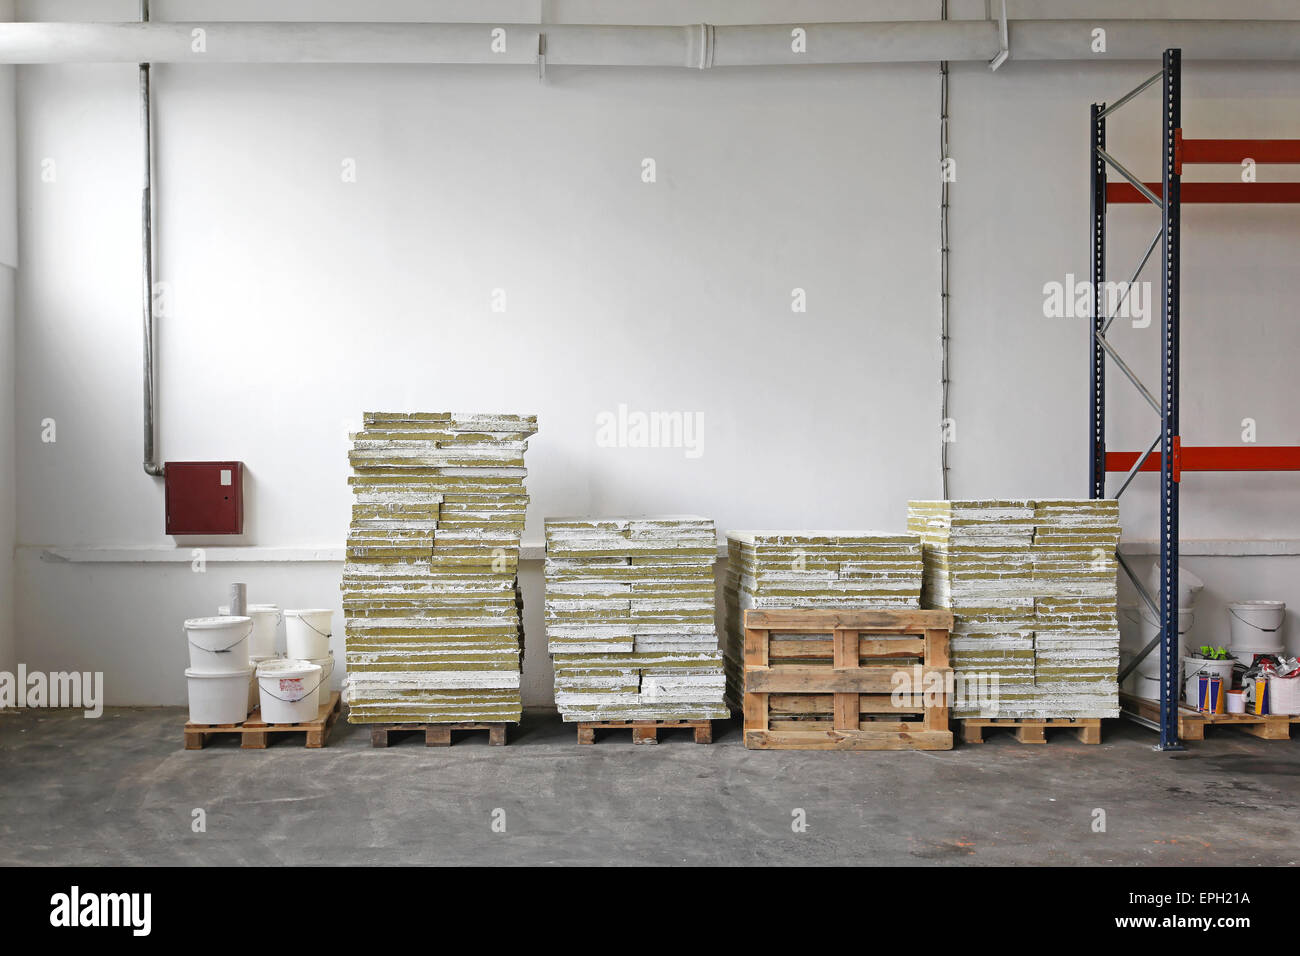 Construction material Stock Photo